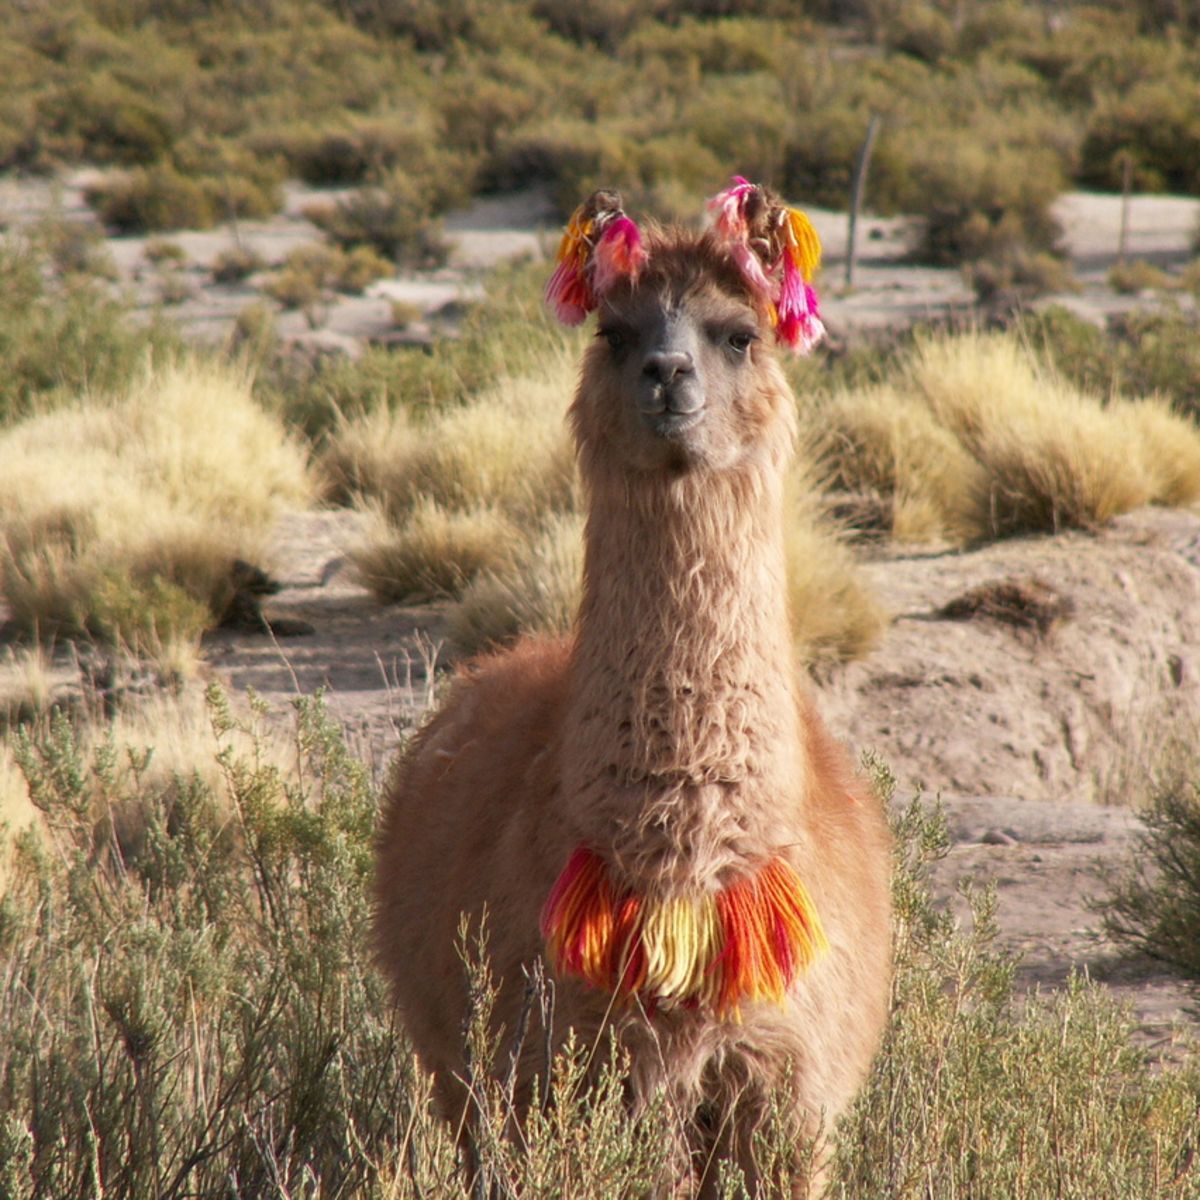 Llama with Incan decoration facing camera and standing among grass tufts 